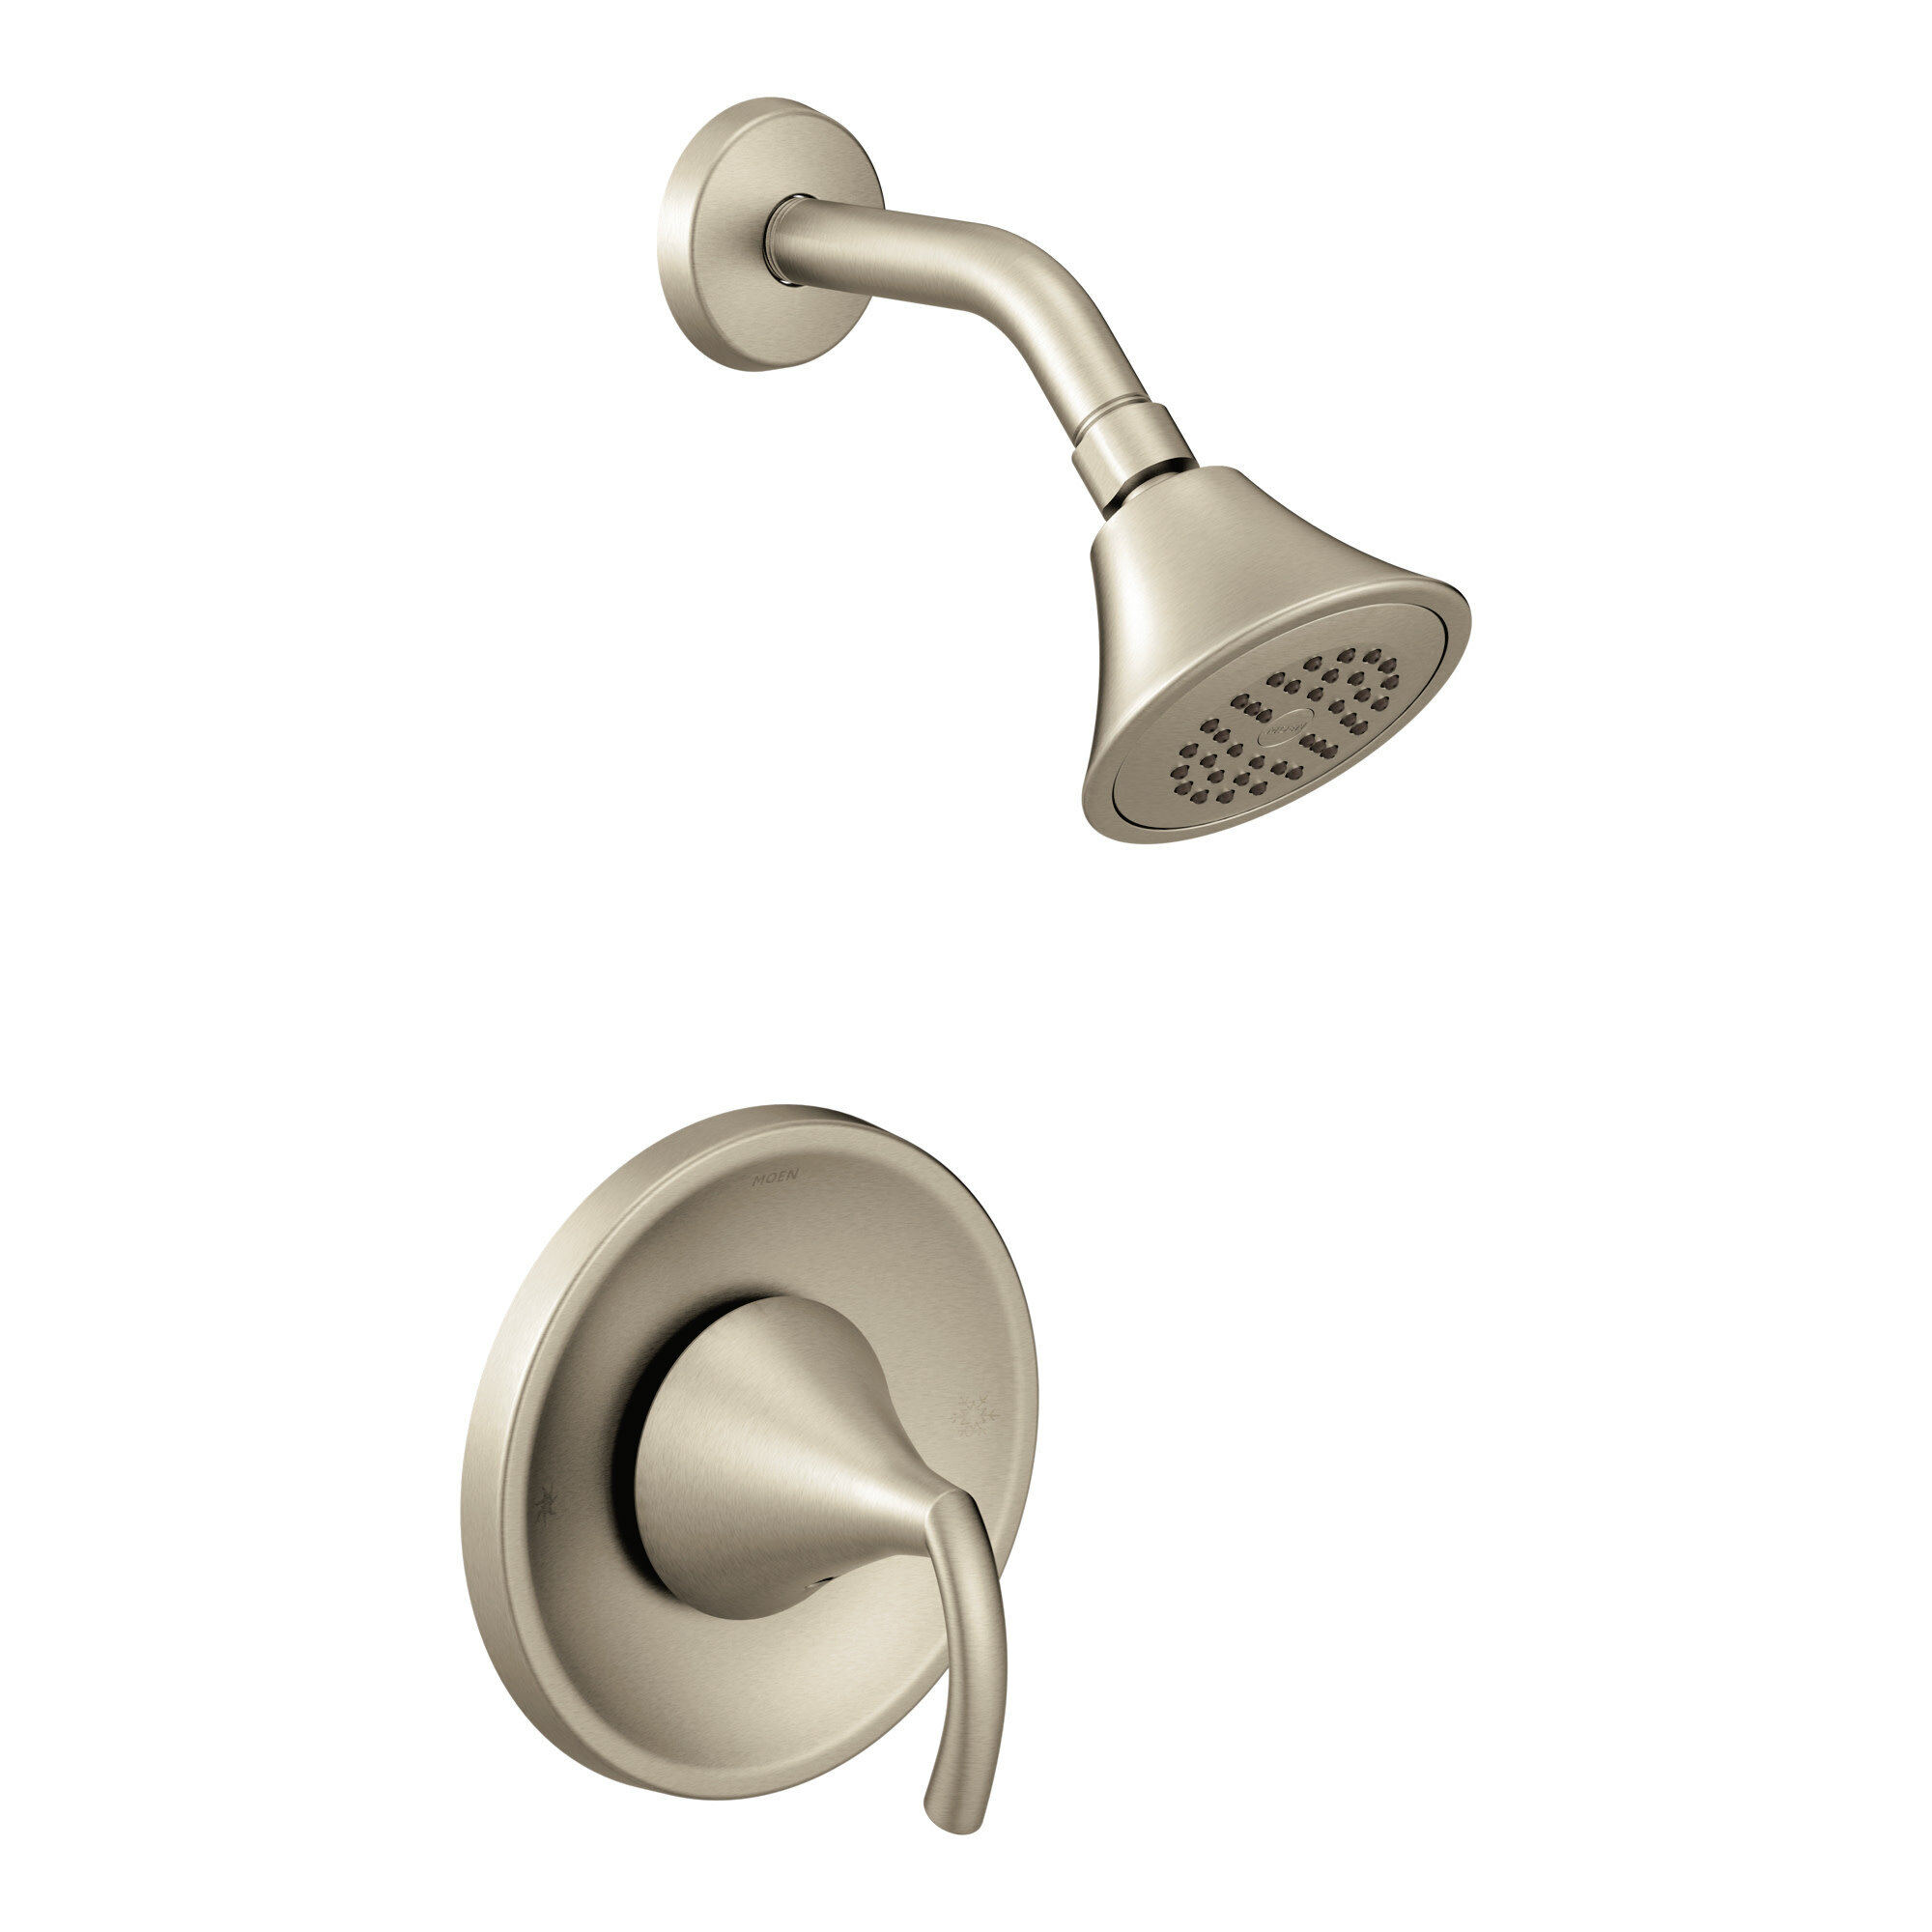 Moen Glyde Shower Faucet Lever Handle With Posi Temp Reviews